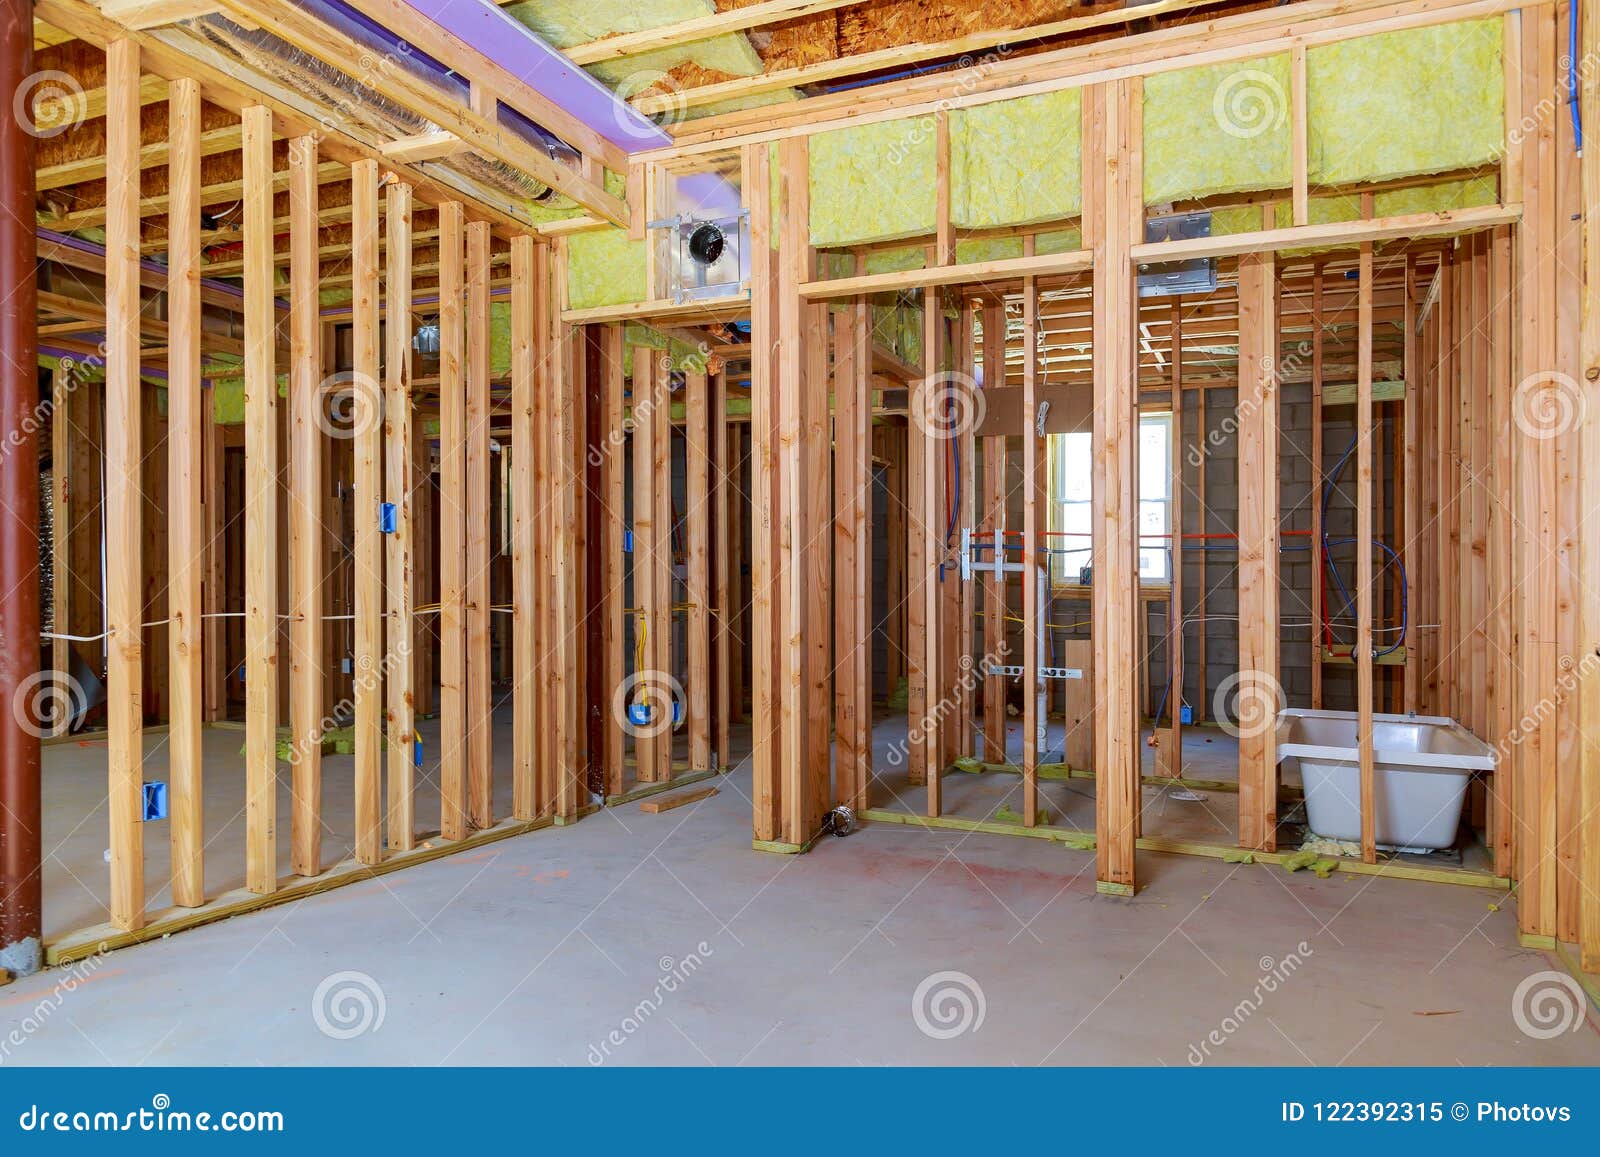 Wood Framing Work In Progress With Wood Framing Walls And